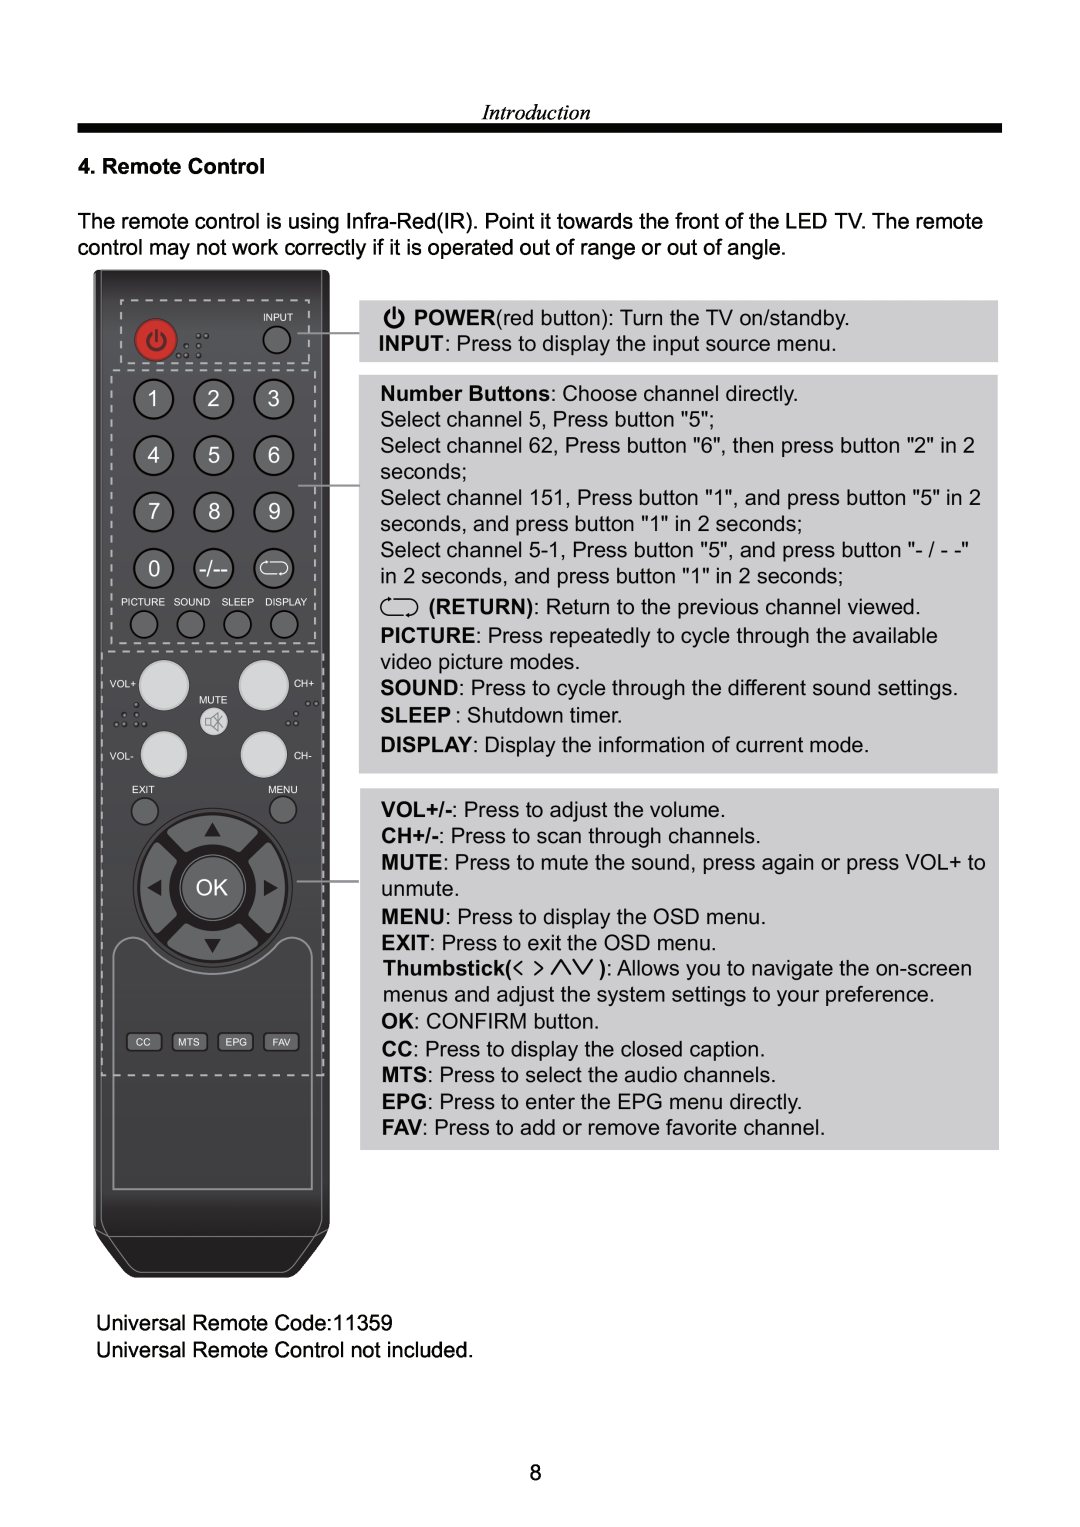 Curtis RLED3218A manual 1 2 4 5 7 8, Introduction, Remote Control 